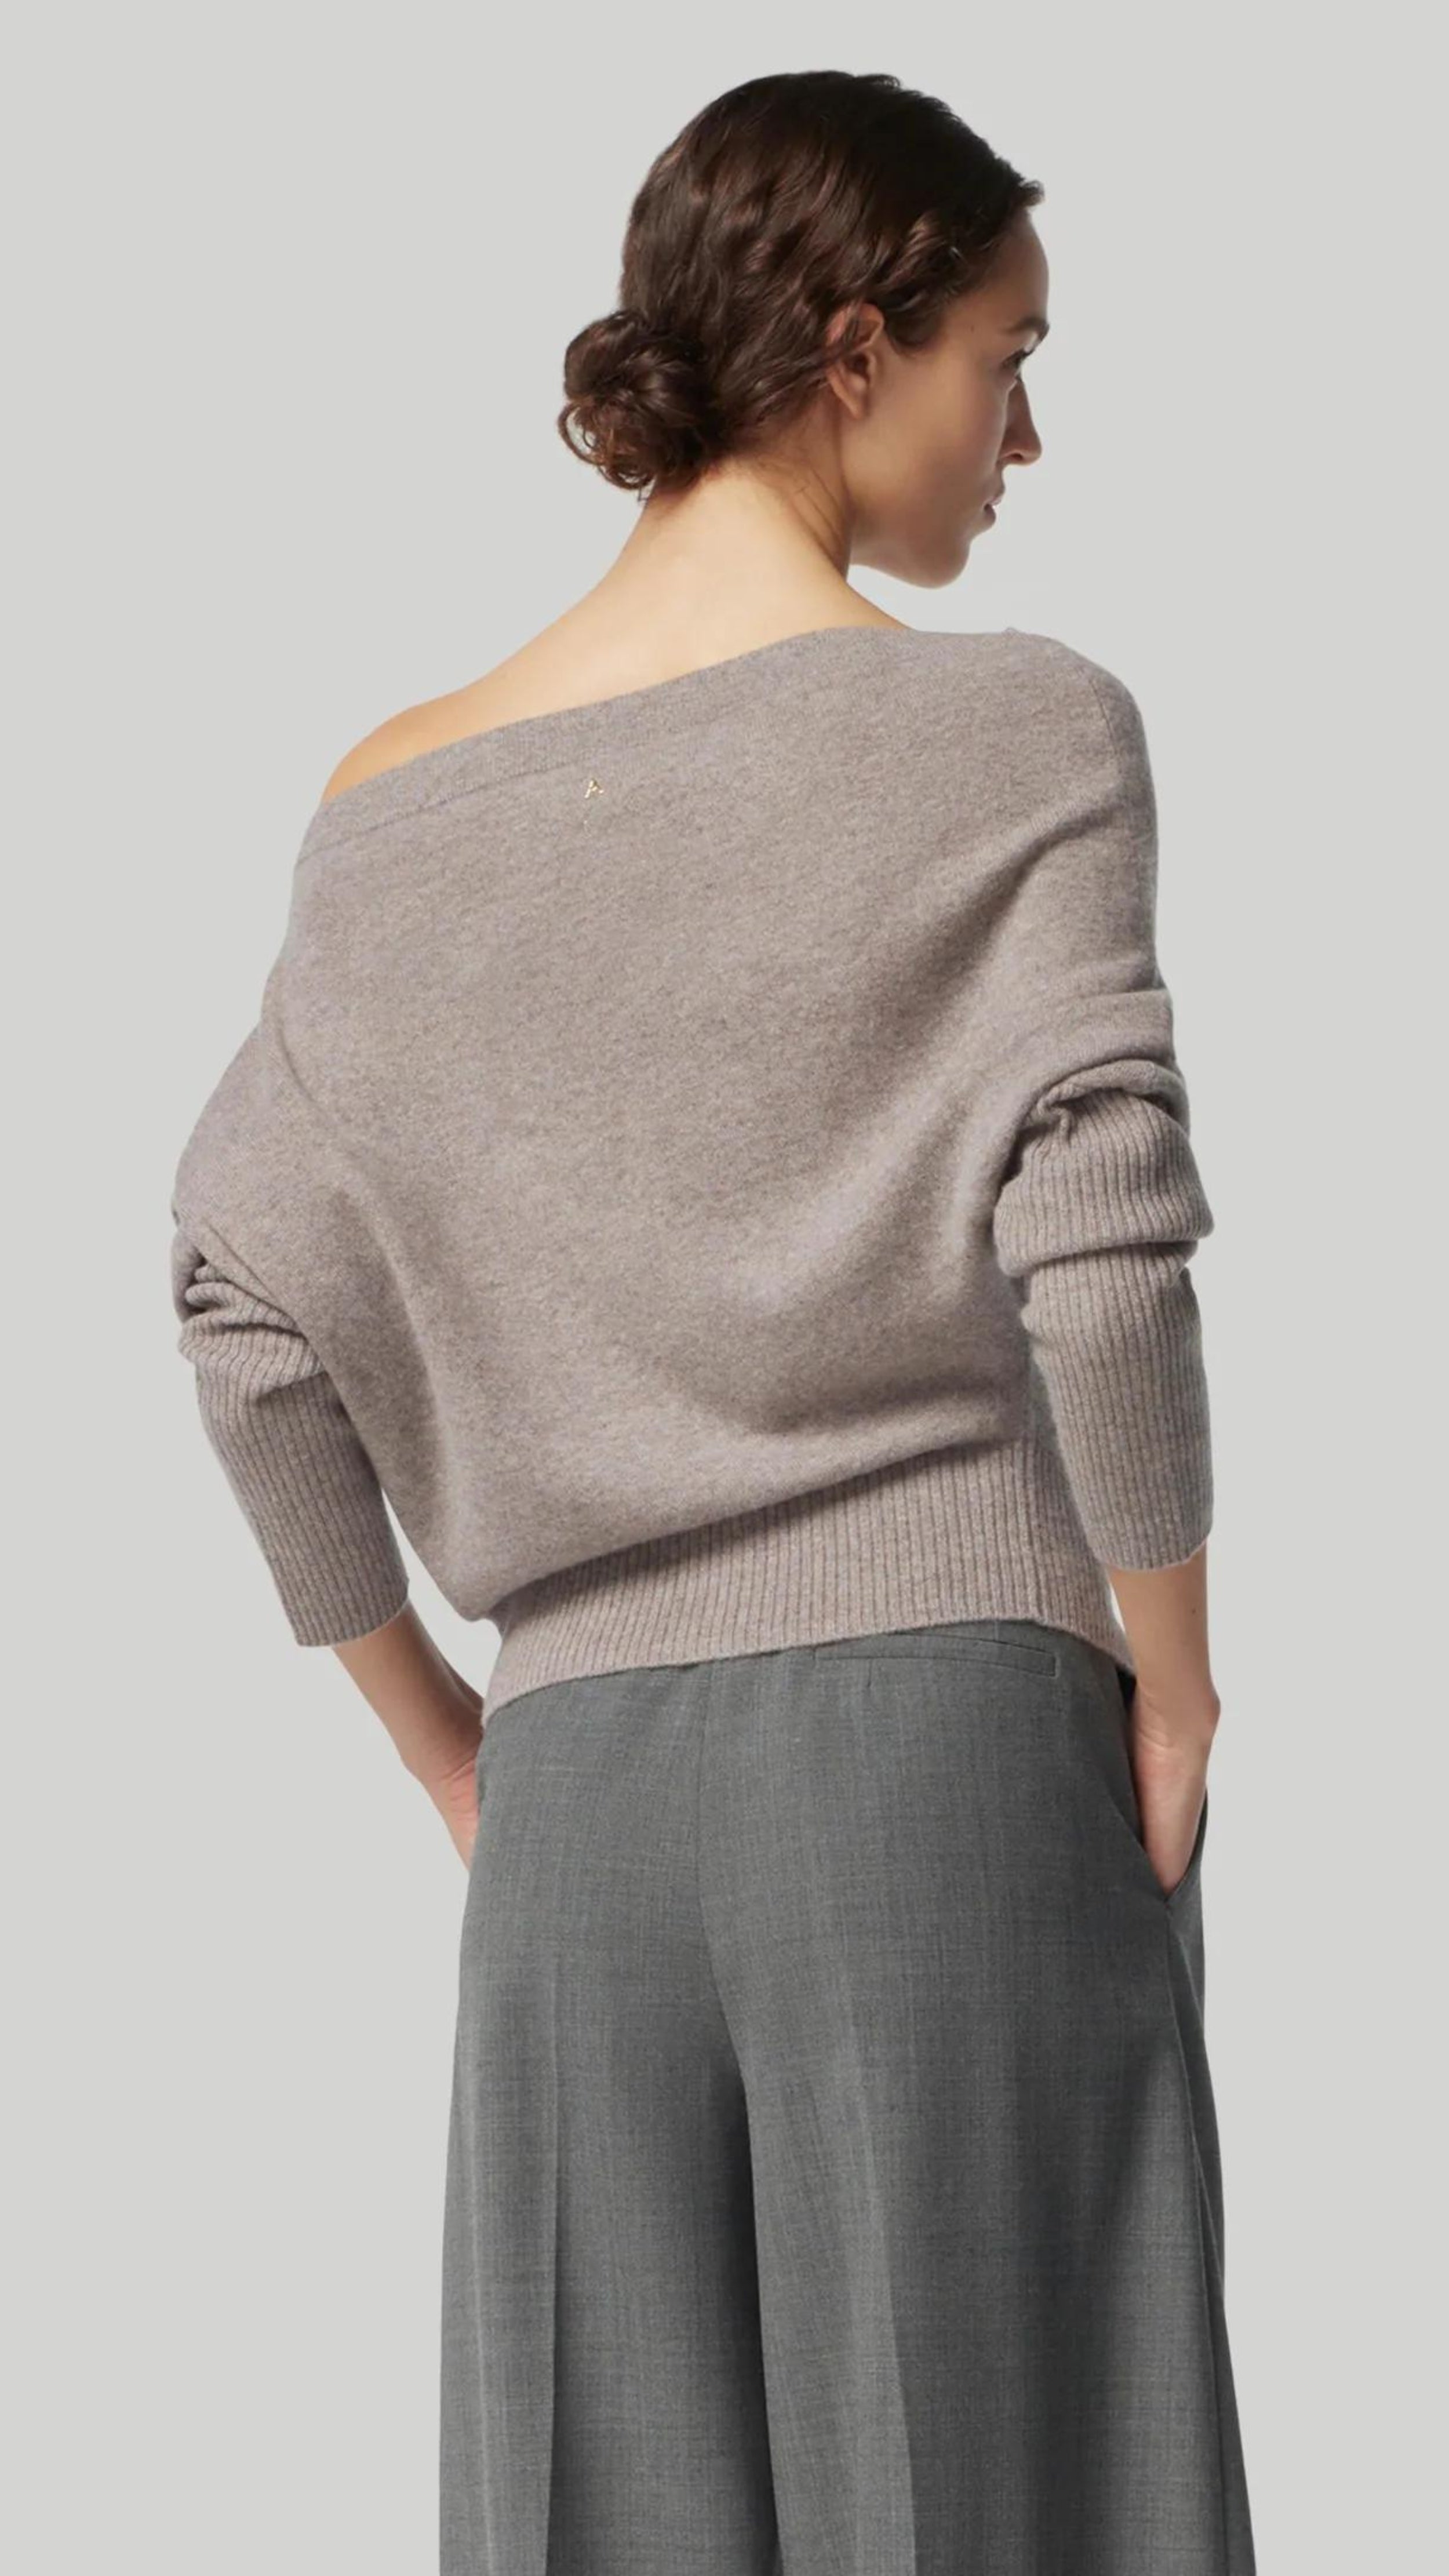 Altuzarra Paxi Cashmere Sweater in Grey. Luxury soft knit jumper in light gray, off the shoulder style. With a fitted waist line and sleeves for an elegantly casual look. Shown on model facing to the back.